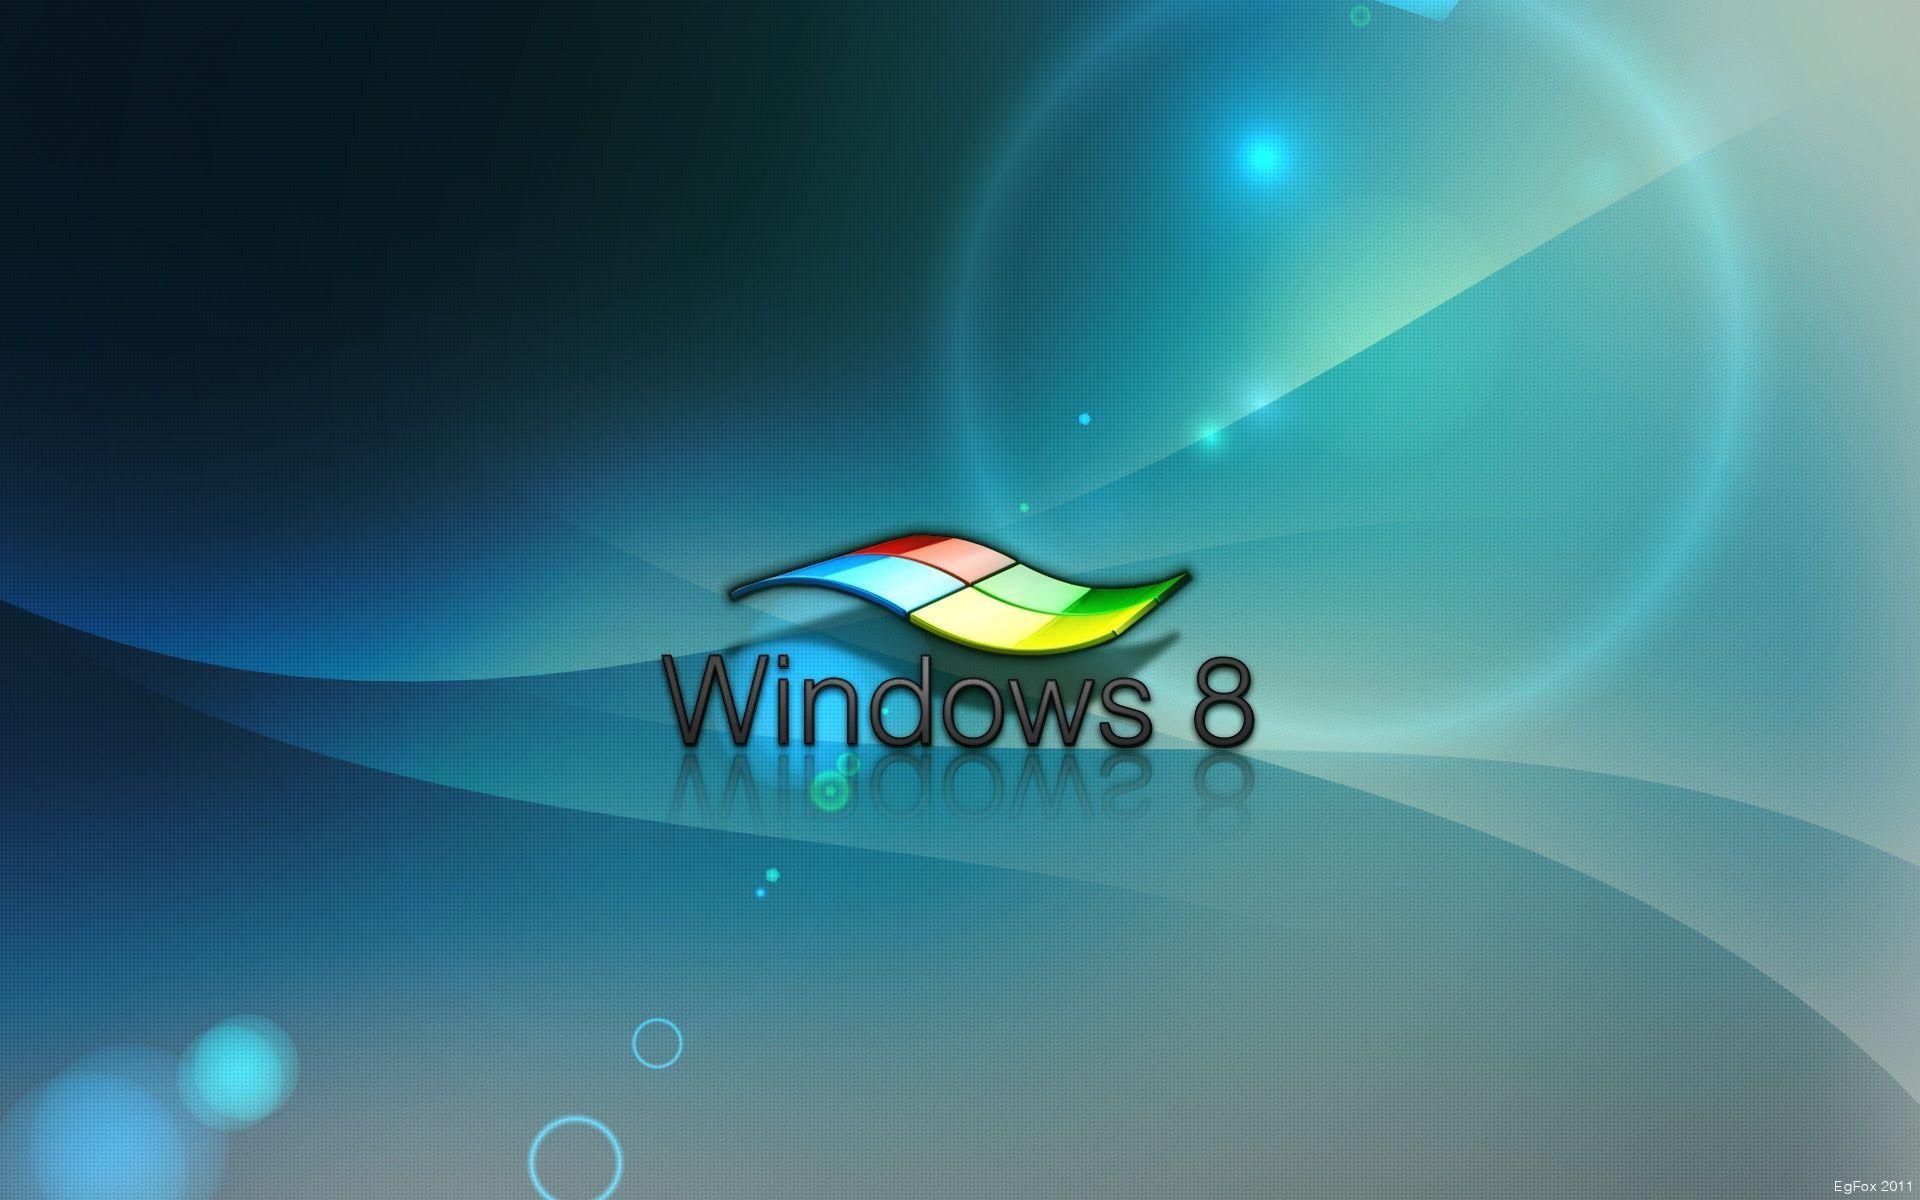 Wallpapers For > Windows 8 Ultimate Wallpapers Hd 3d For Desktop